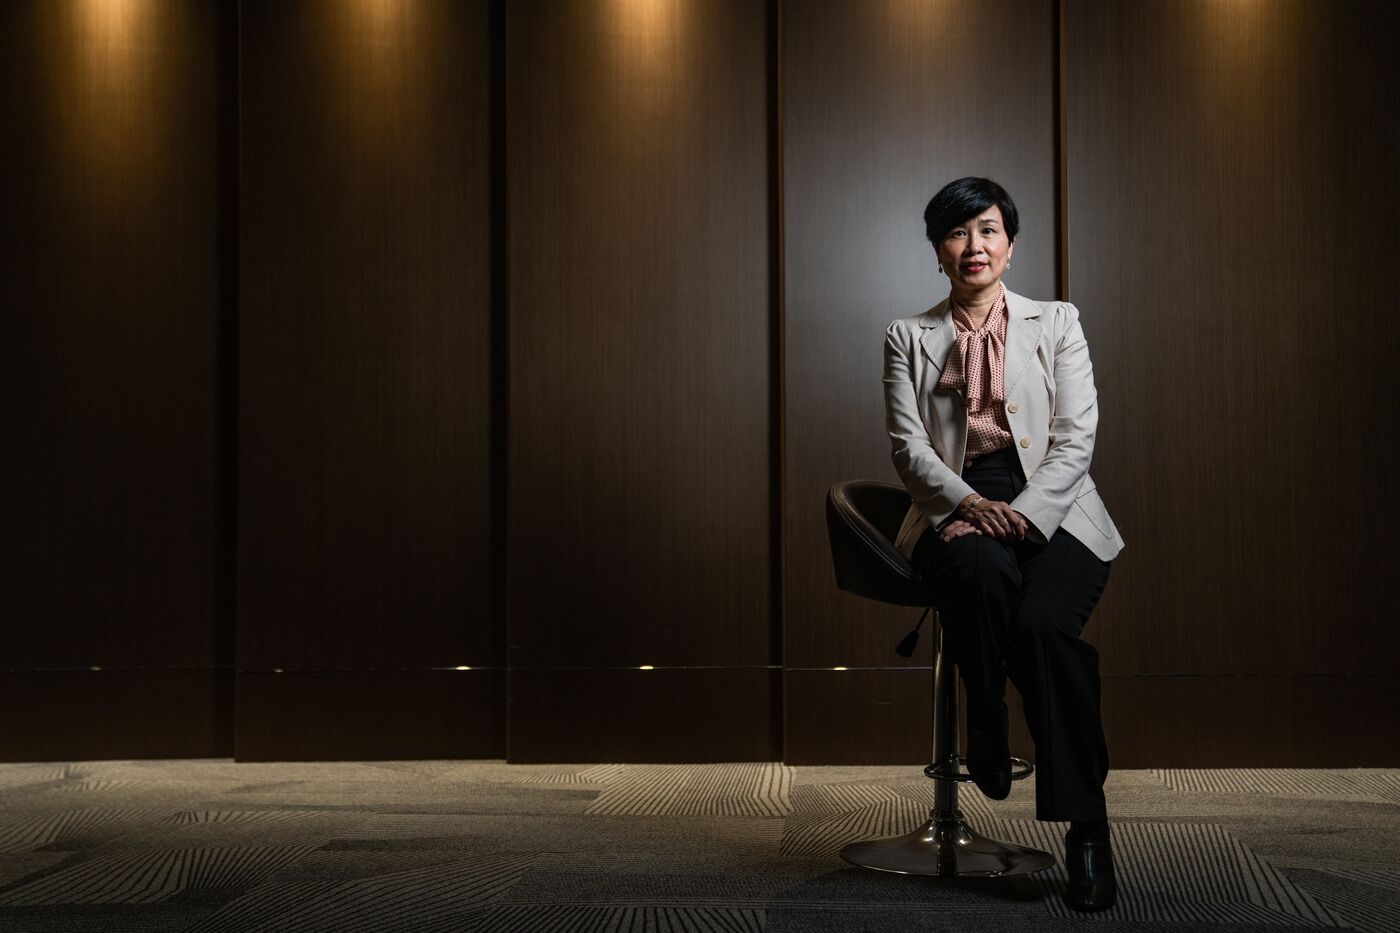 Kathy Chan, CFO of Luk Fook Holdings International Ltd., speaks during an interview at her office, in Hong Kong, China, on Friday, Sep 17, 2021. Photographer: Lam Yik/Bloomberg